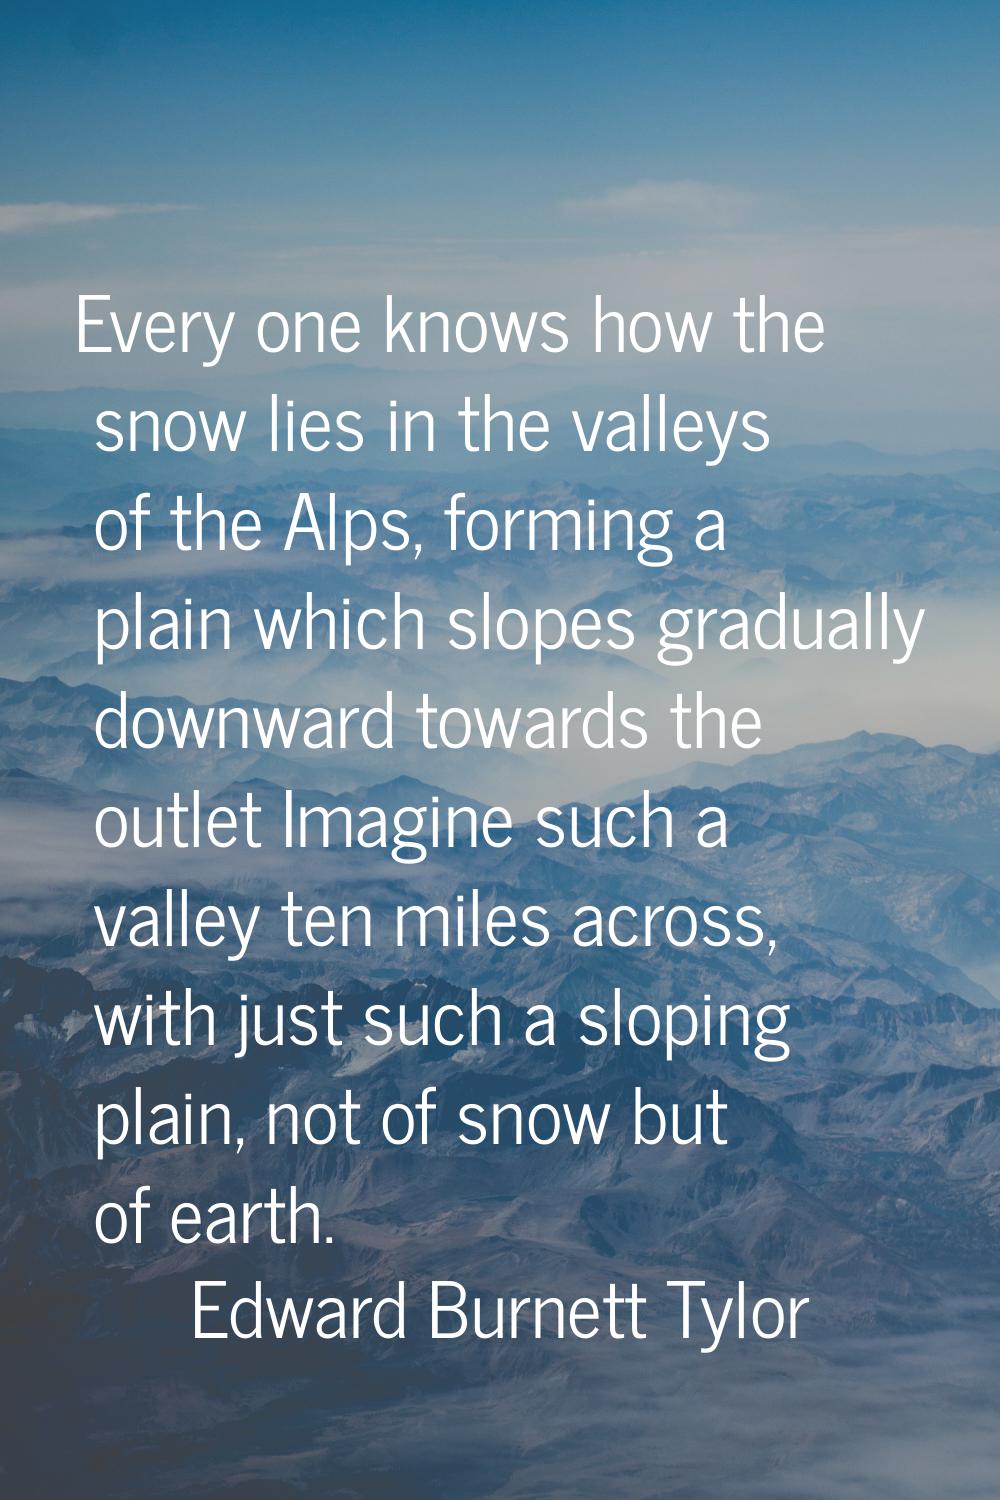 Every one knows how the snow lies in the valleys of the Alps, forming a plain which slopes graduall